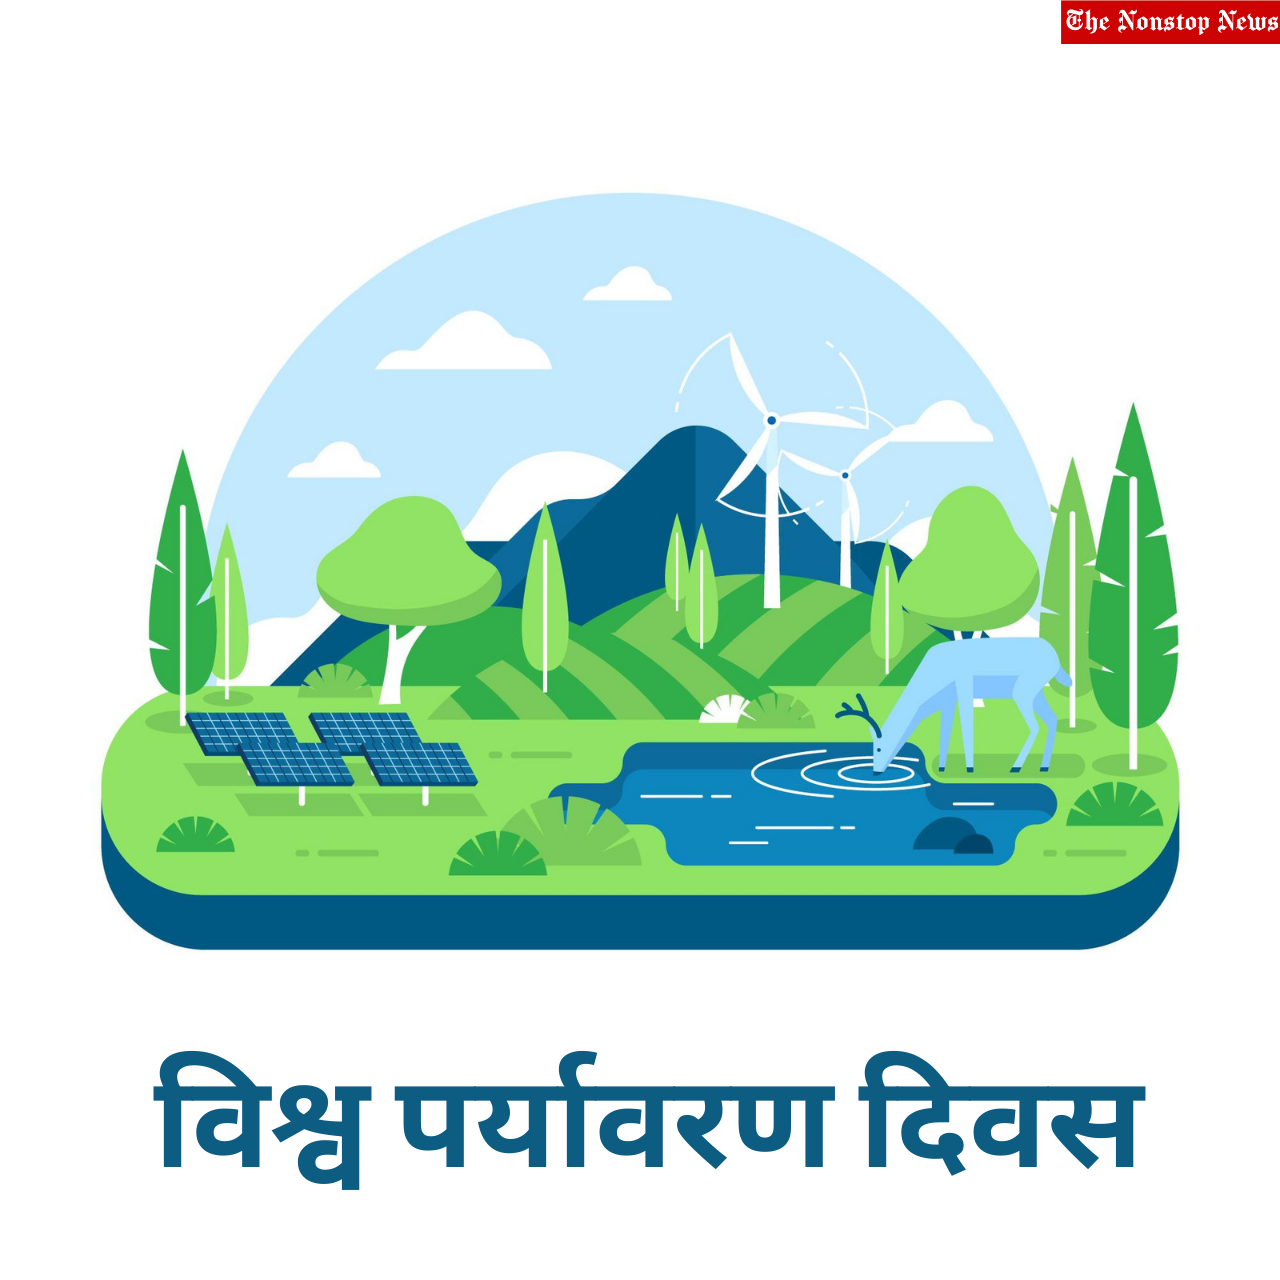 World Environment Day 2022: Top Hindi Quotes, Images, Posters, Messages, Greetings to Create Awareness